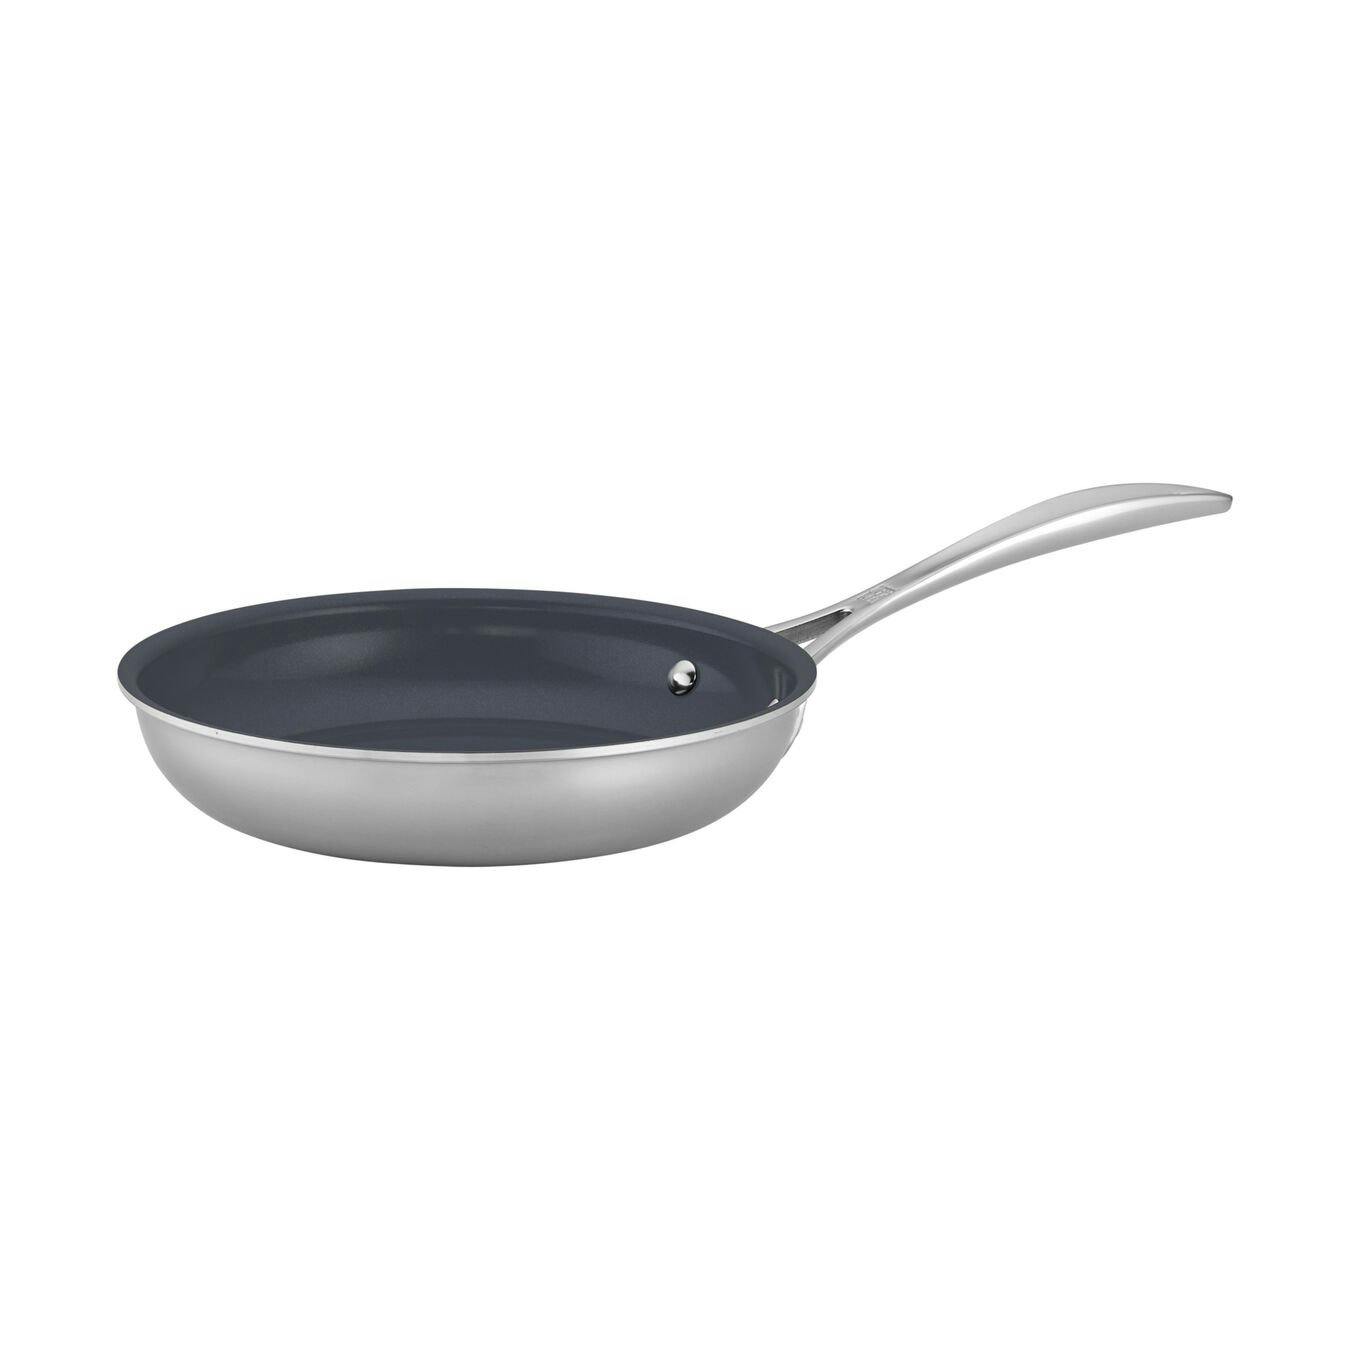 Zwilling Clad CFX 12-Inch, Stainless Steel, Ceramic, Non-Stick, Fry Pan